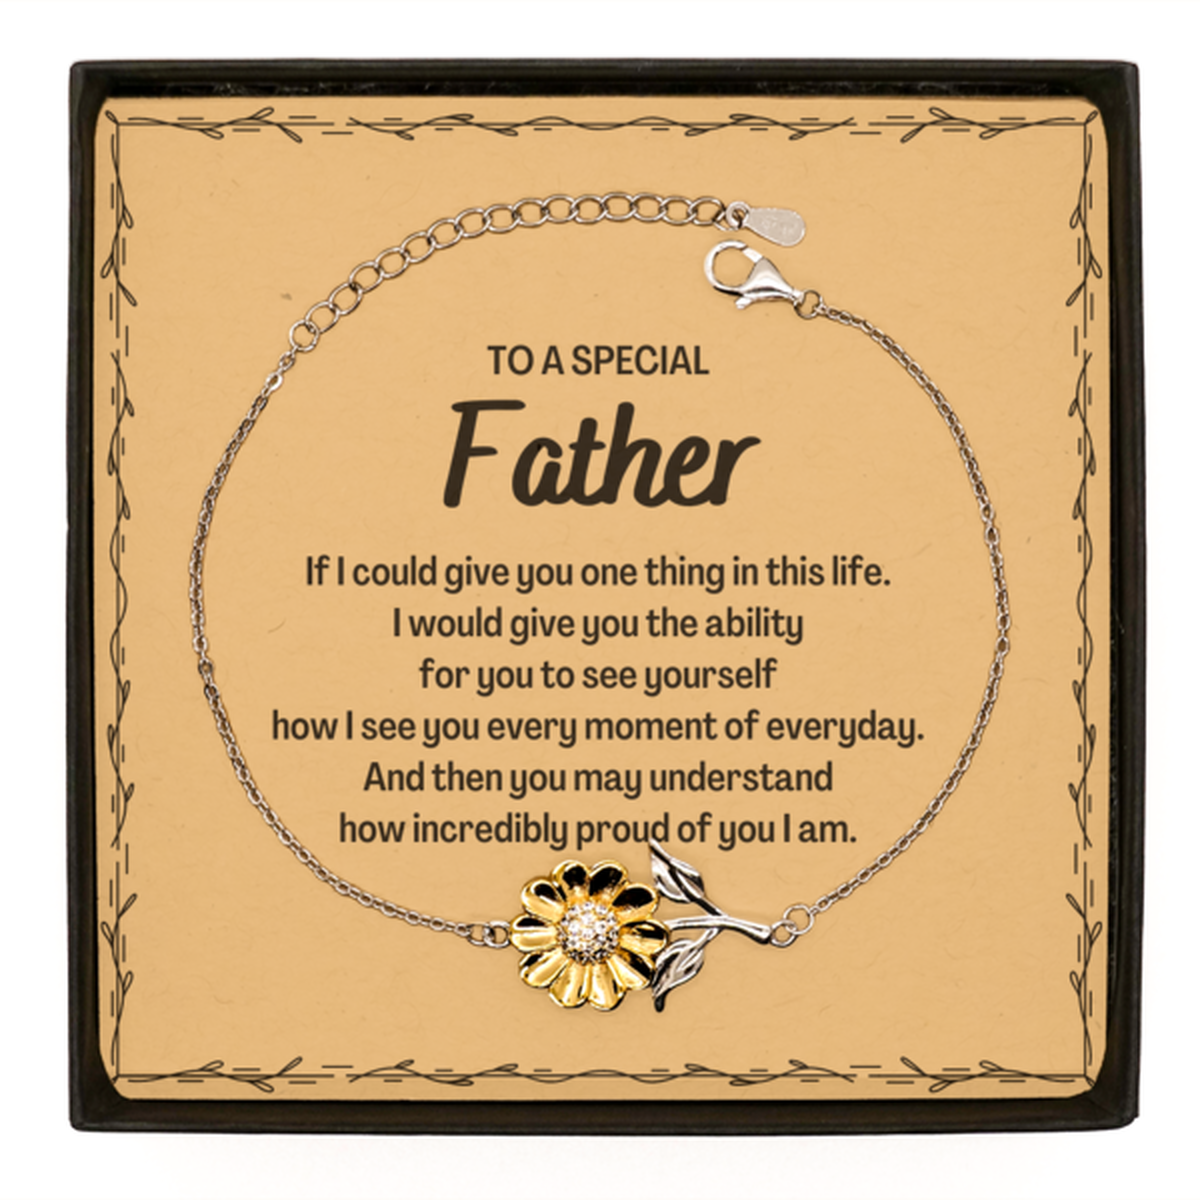 To My Father Sunflower Bracelet, Gifts For Father Message Card, Inspirational Gifts for Christmas Birthday, Epic Gifts for Father To A Special Father how incredibly proud of you I am